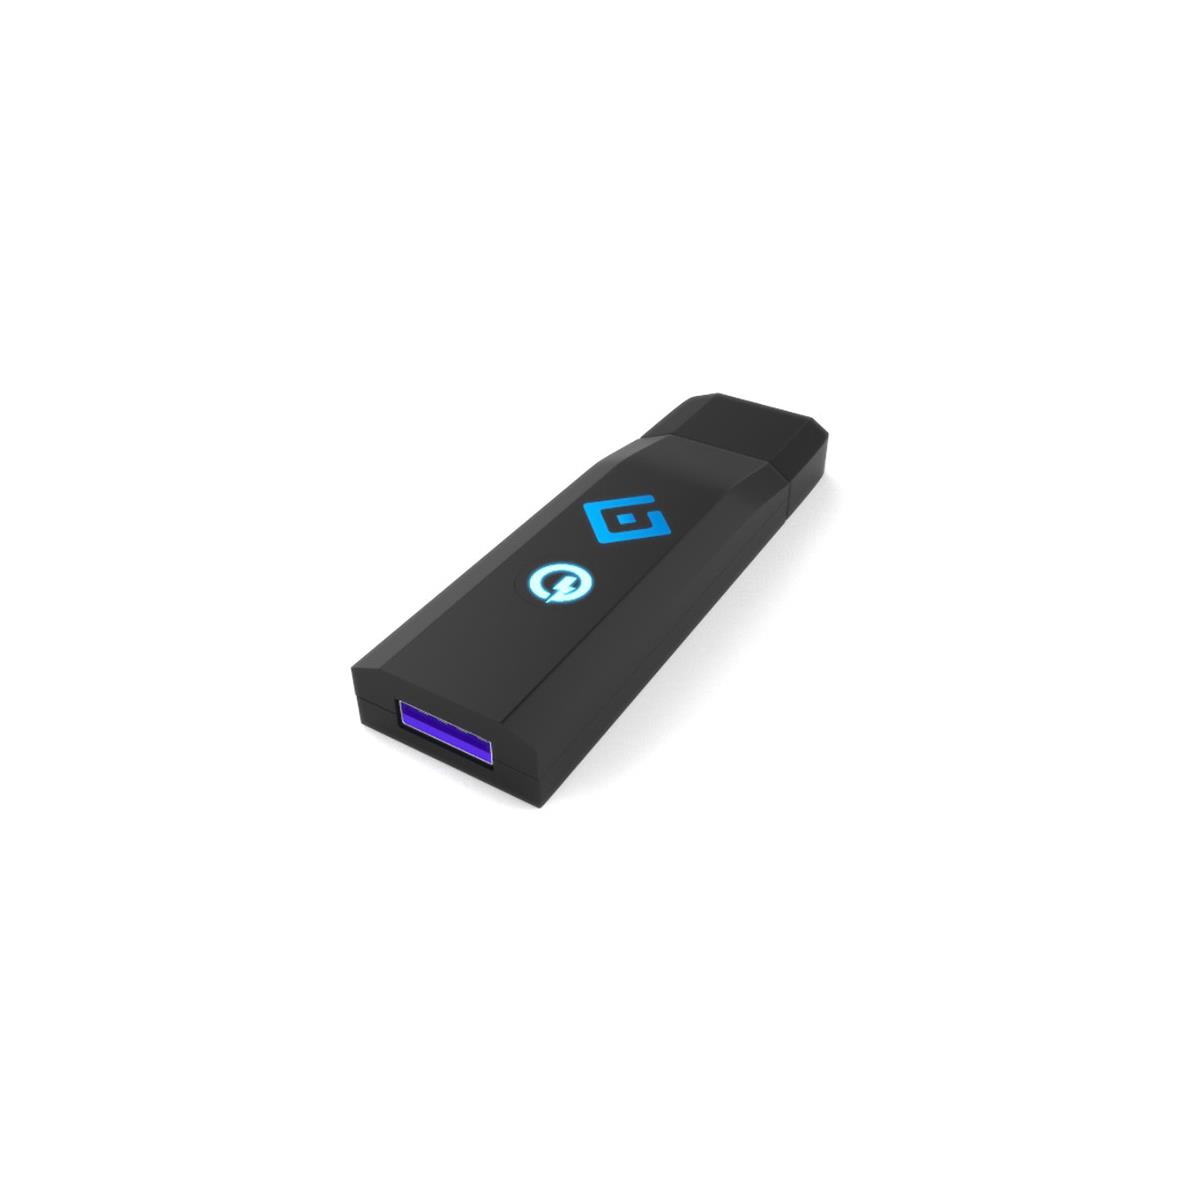 Image of HDfury GoBlue IR Extender/Bluetooth Dongle